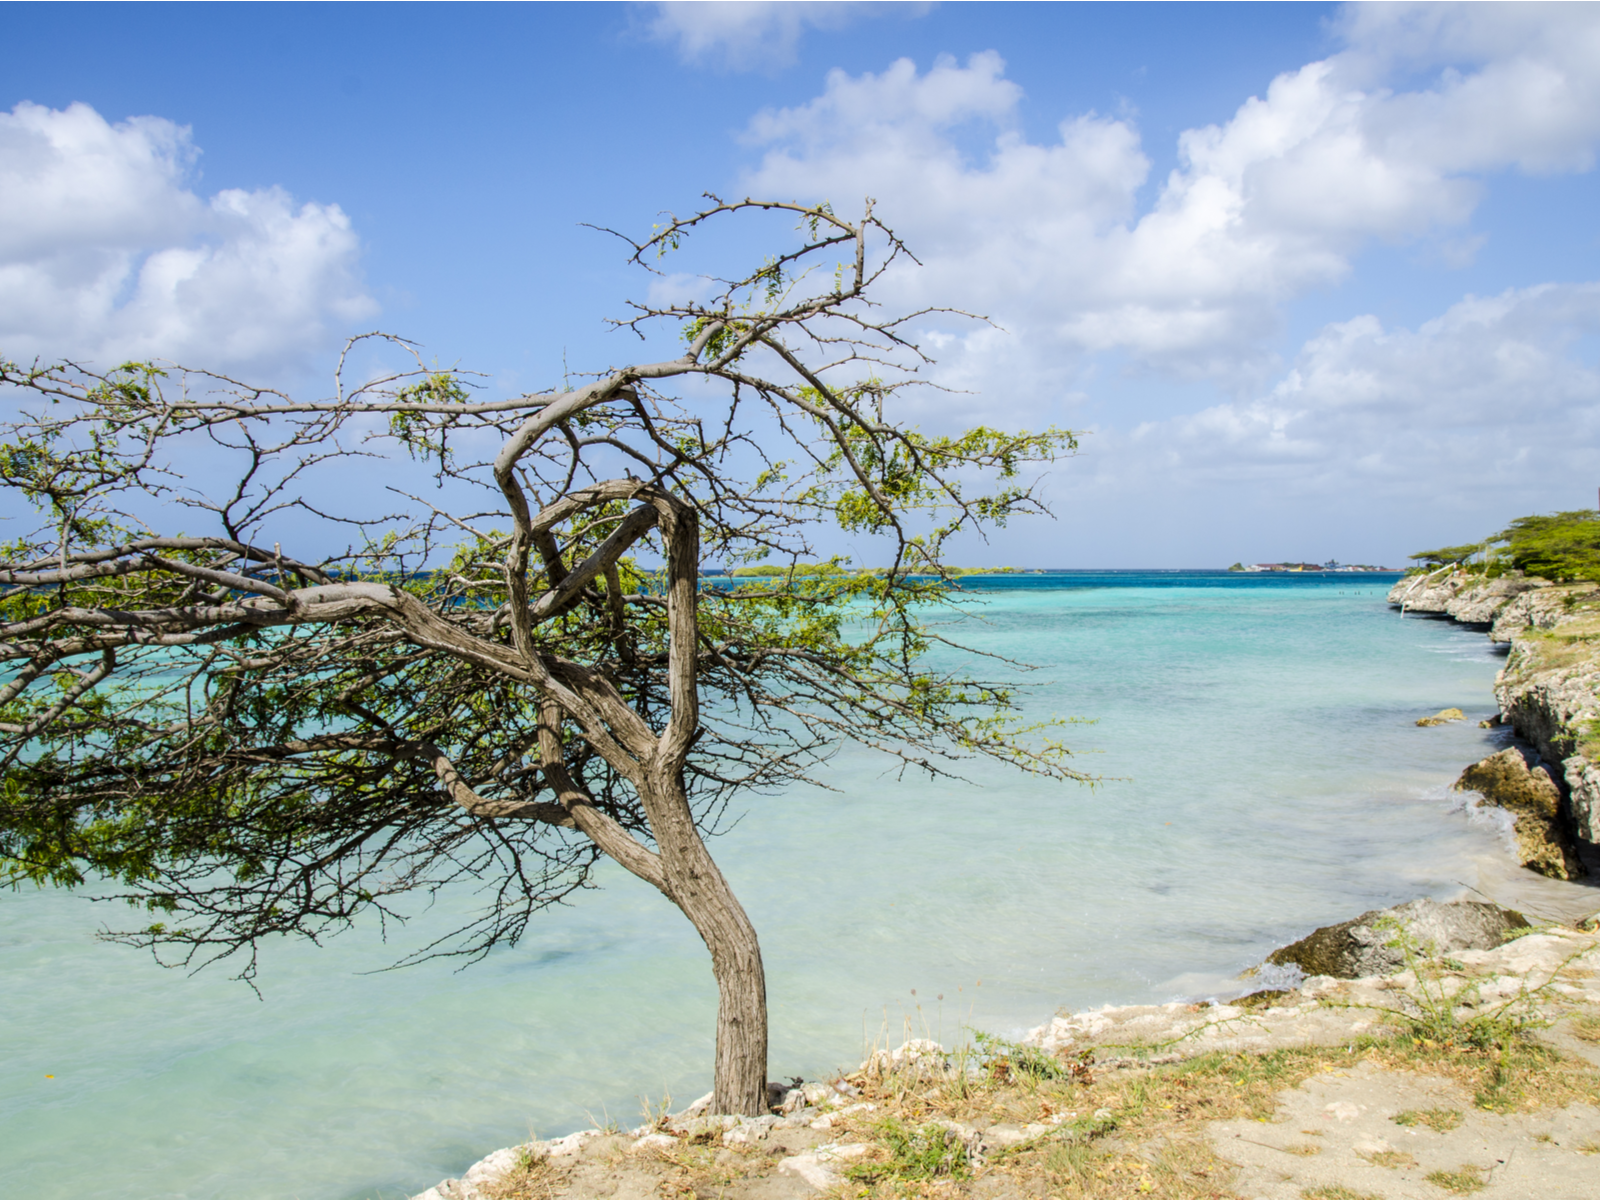 A small tree bending towards the clear waters of Rodger's Beach, a relatively narrow beach and one of the best beaches in Aruba, on a bright partly cloudy day